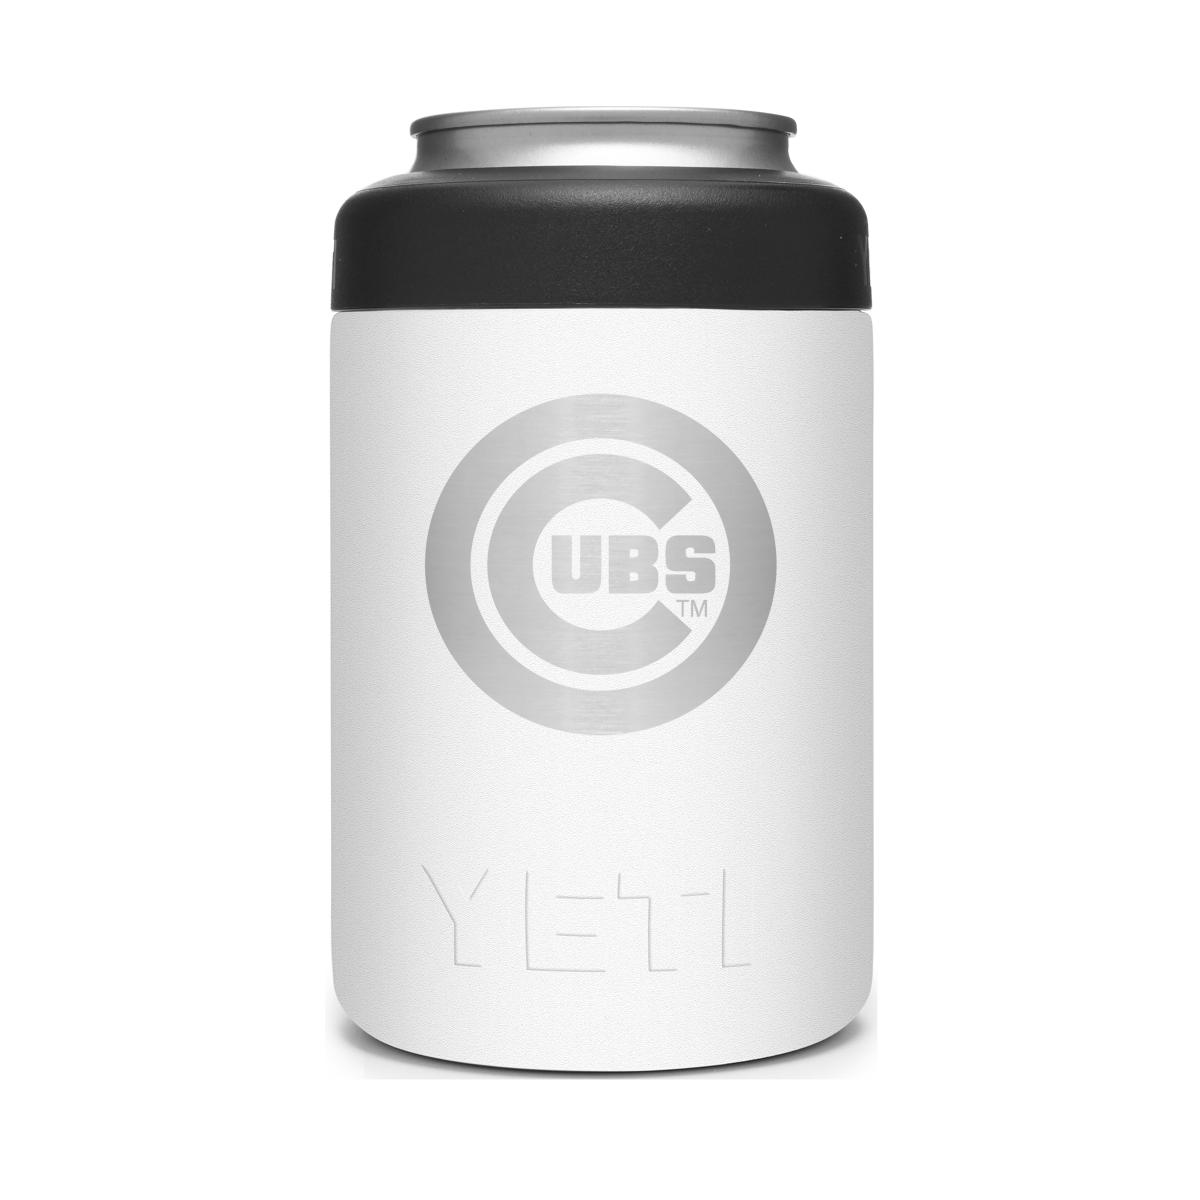 Chicago Cubs Rambler 12 Oz Colster from YETI - $35.00